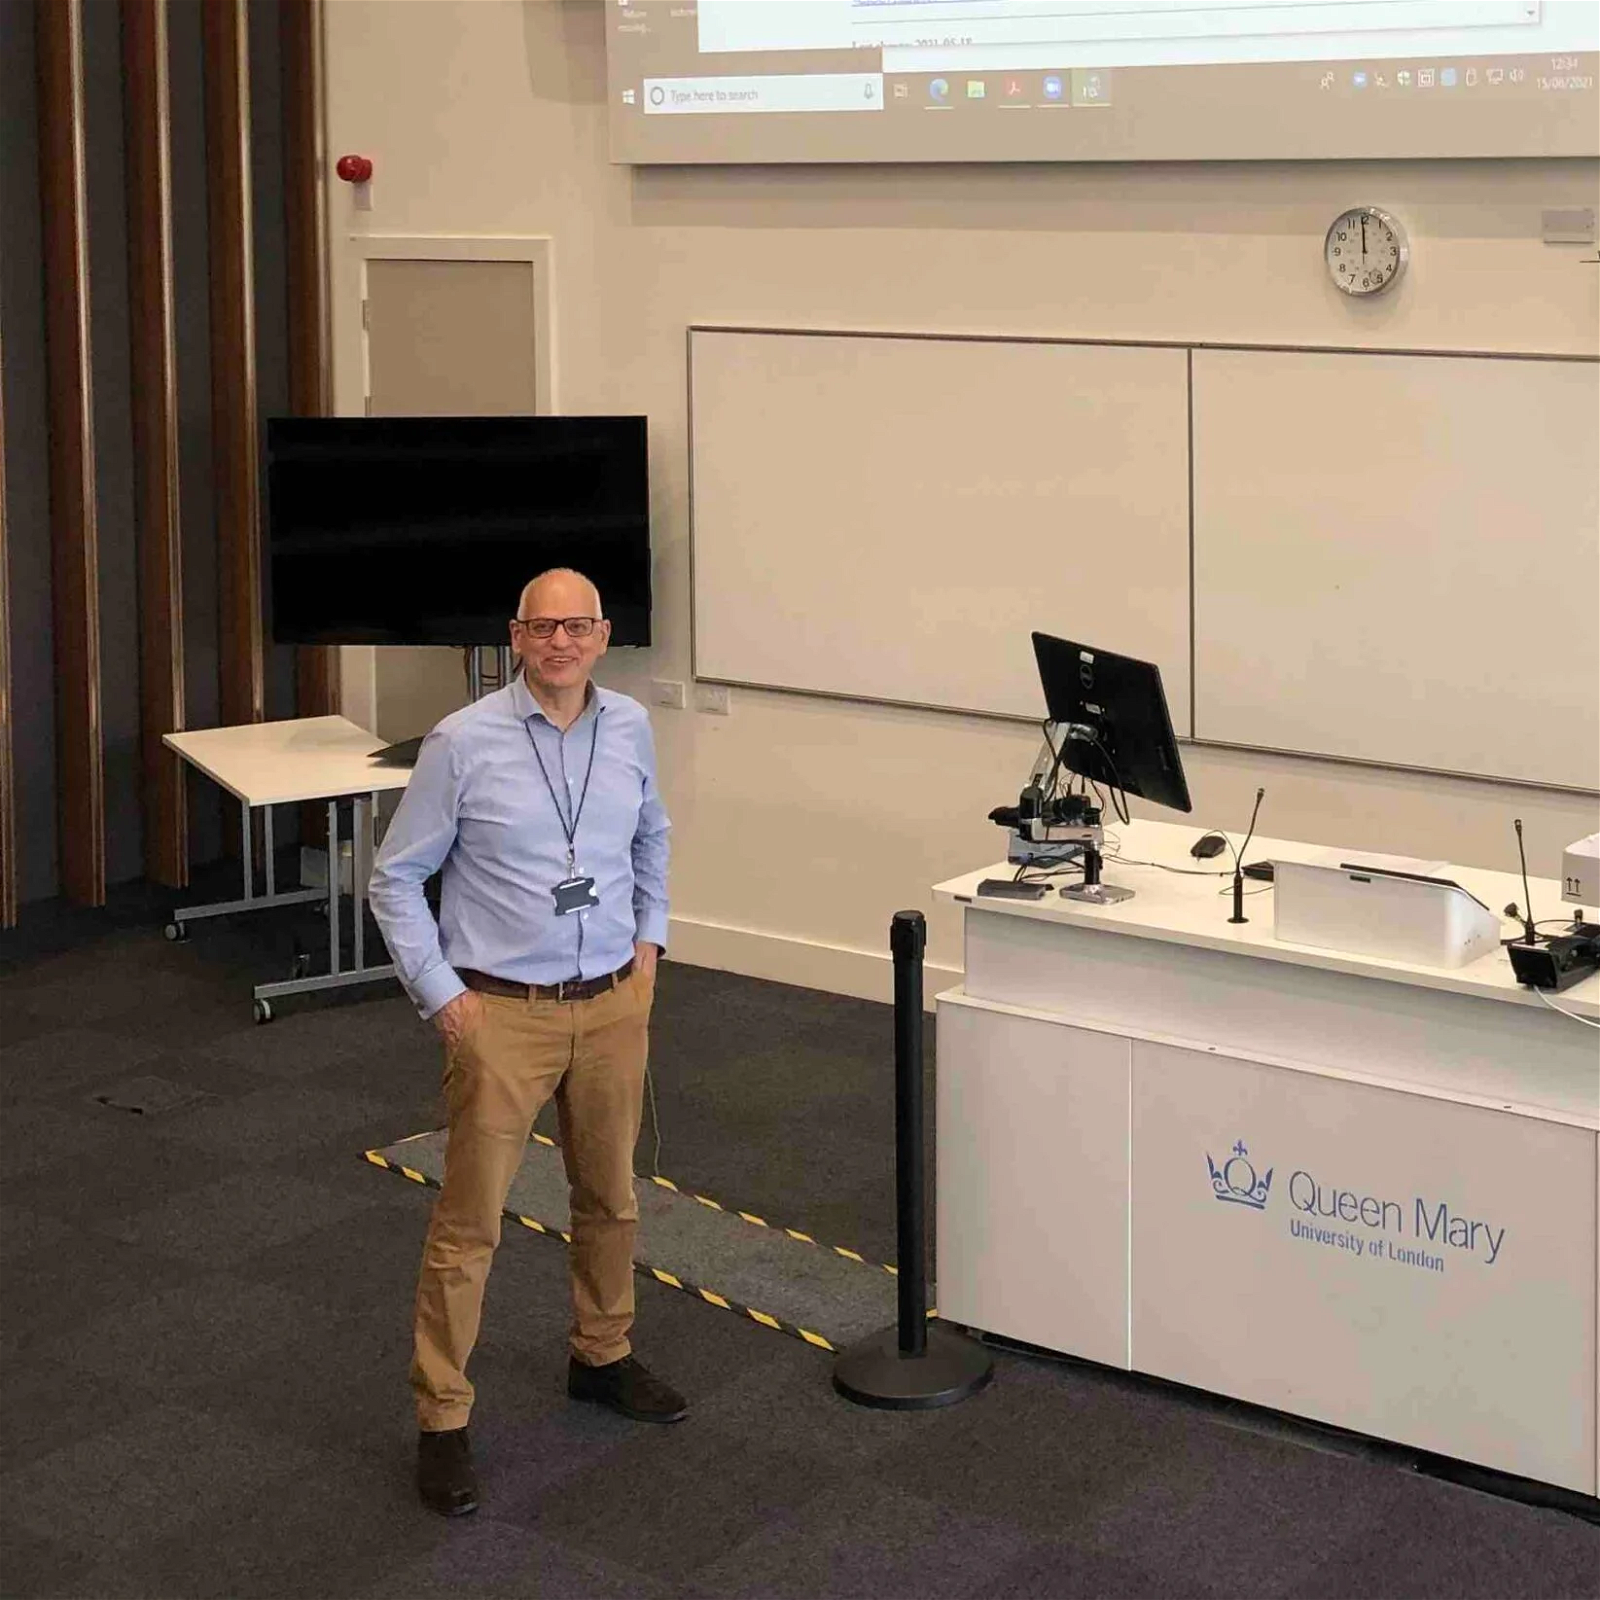 Visiting Lecturer in Statistical Machine Learning at QMUL